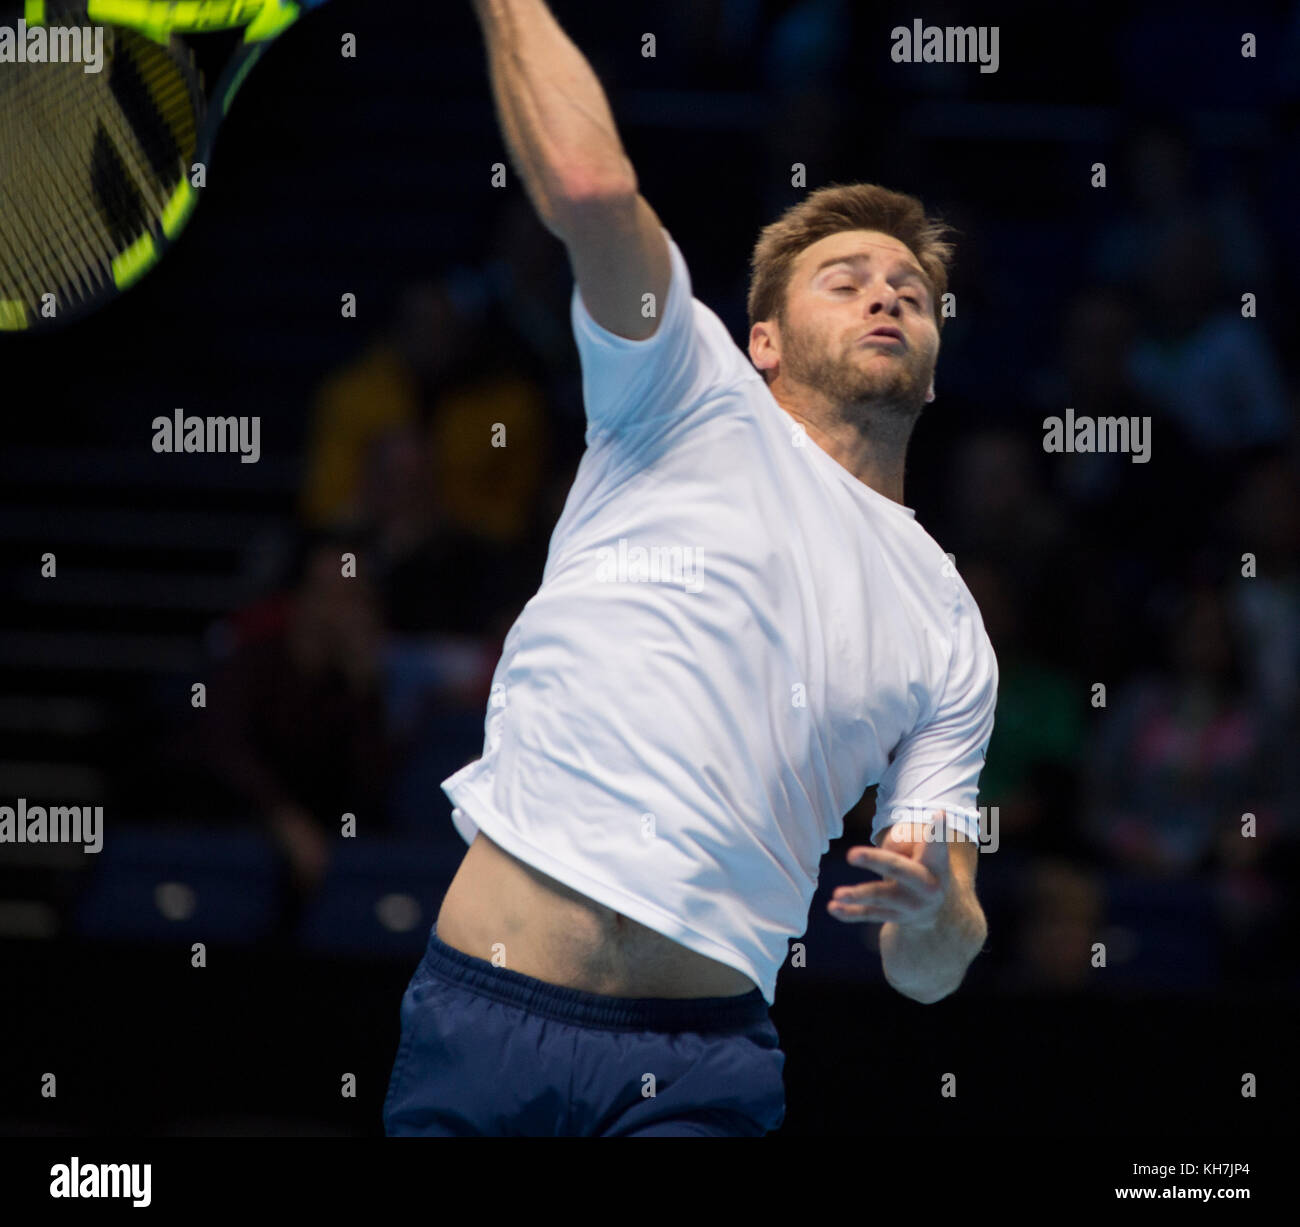 O2, London, UK. 14 November, 2017. Day 3 of the Nitto ATP Finals, evening doubles match, Pierre-Hugues Herbert (FRA) and Nicolas Mahut (FRA) vs Ryan Harrison (USA) and Michael Venus (NZL). Credit: Malcolm Park/Alamy Live News. Stock Photo